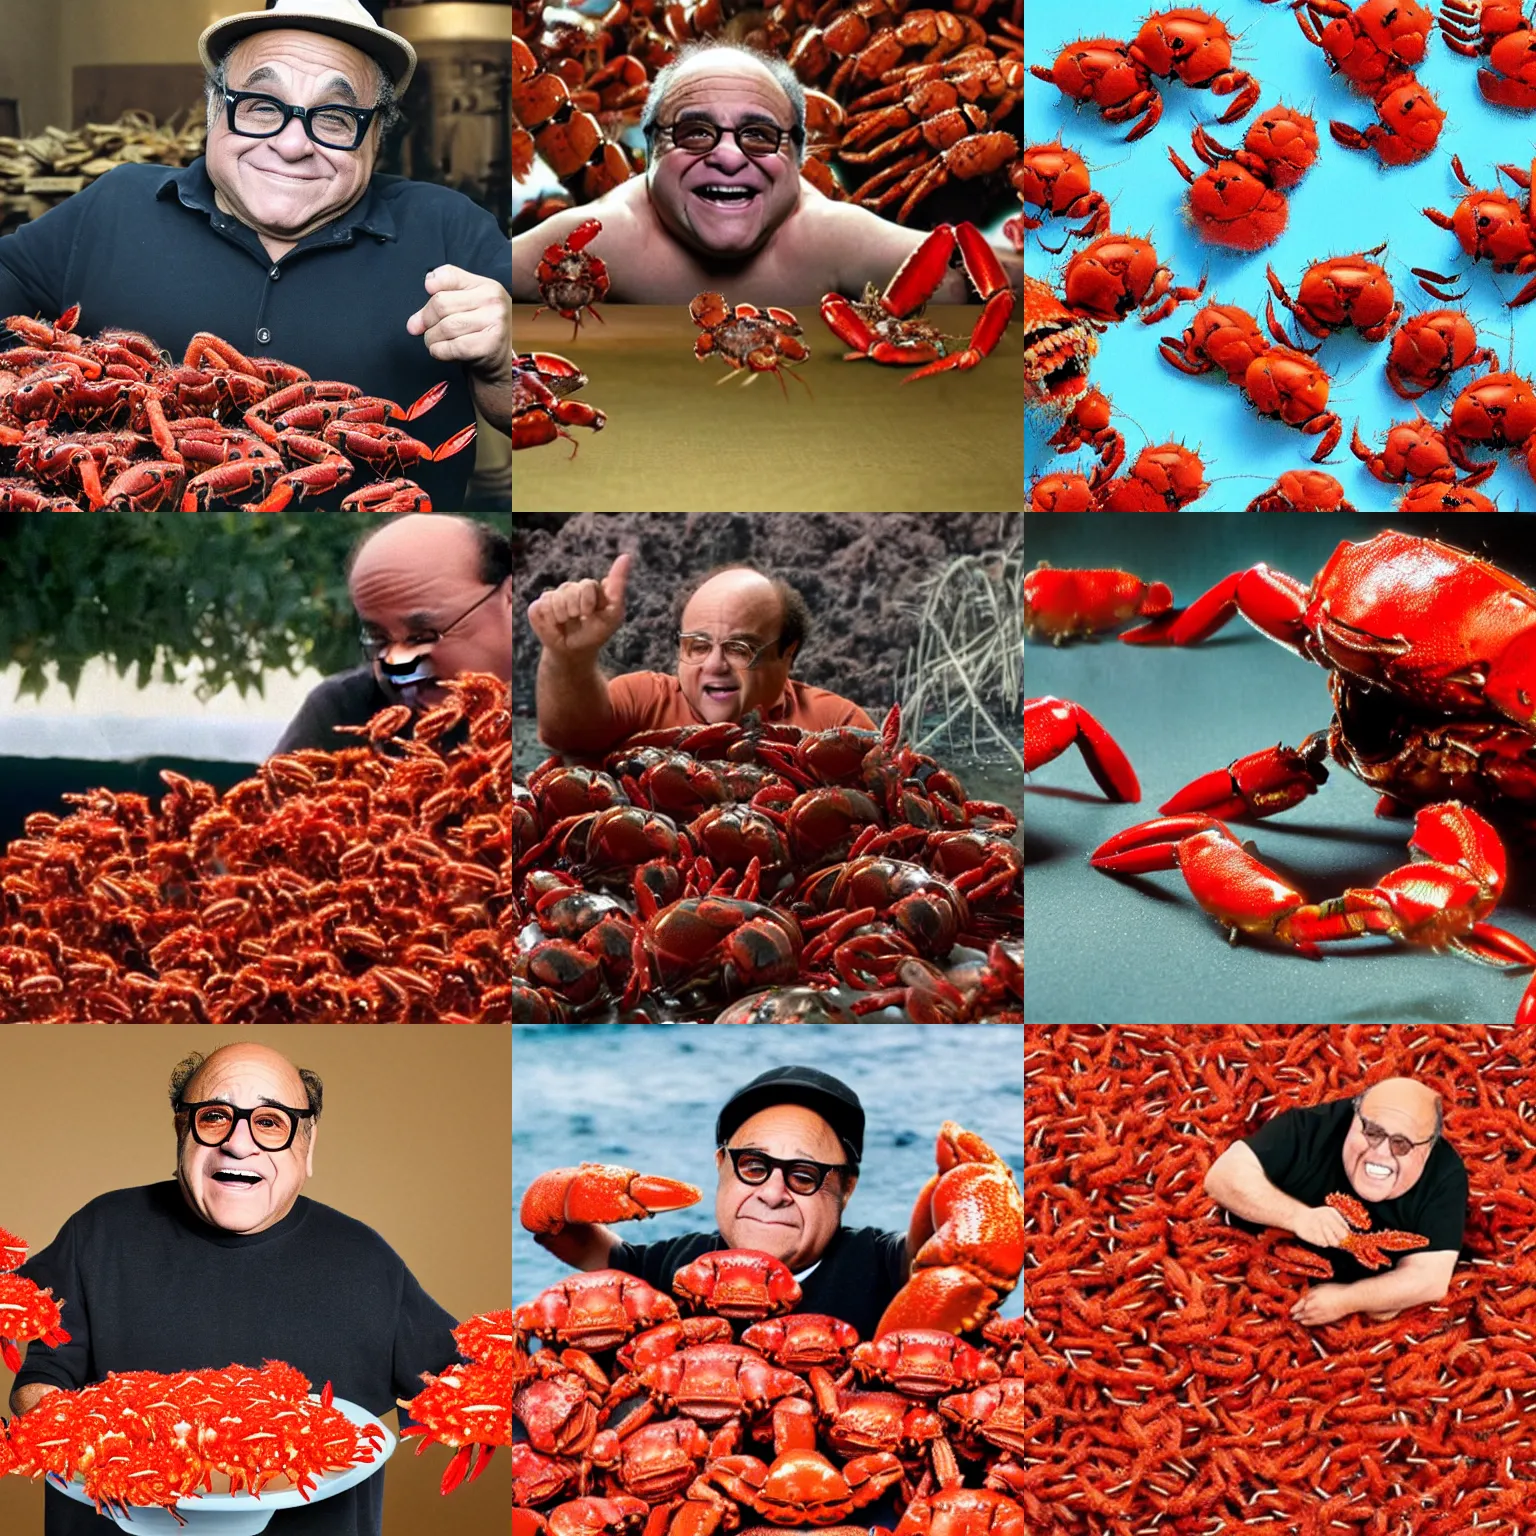 Prompt: Danny Devito fighting an army of small red crabs